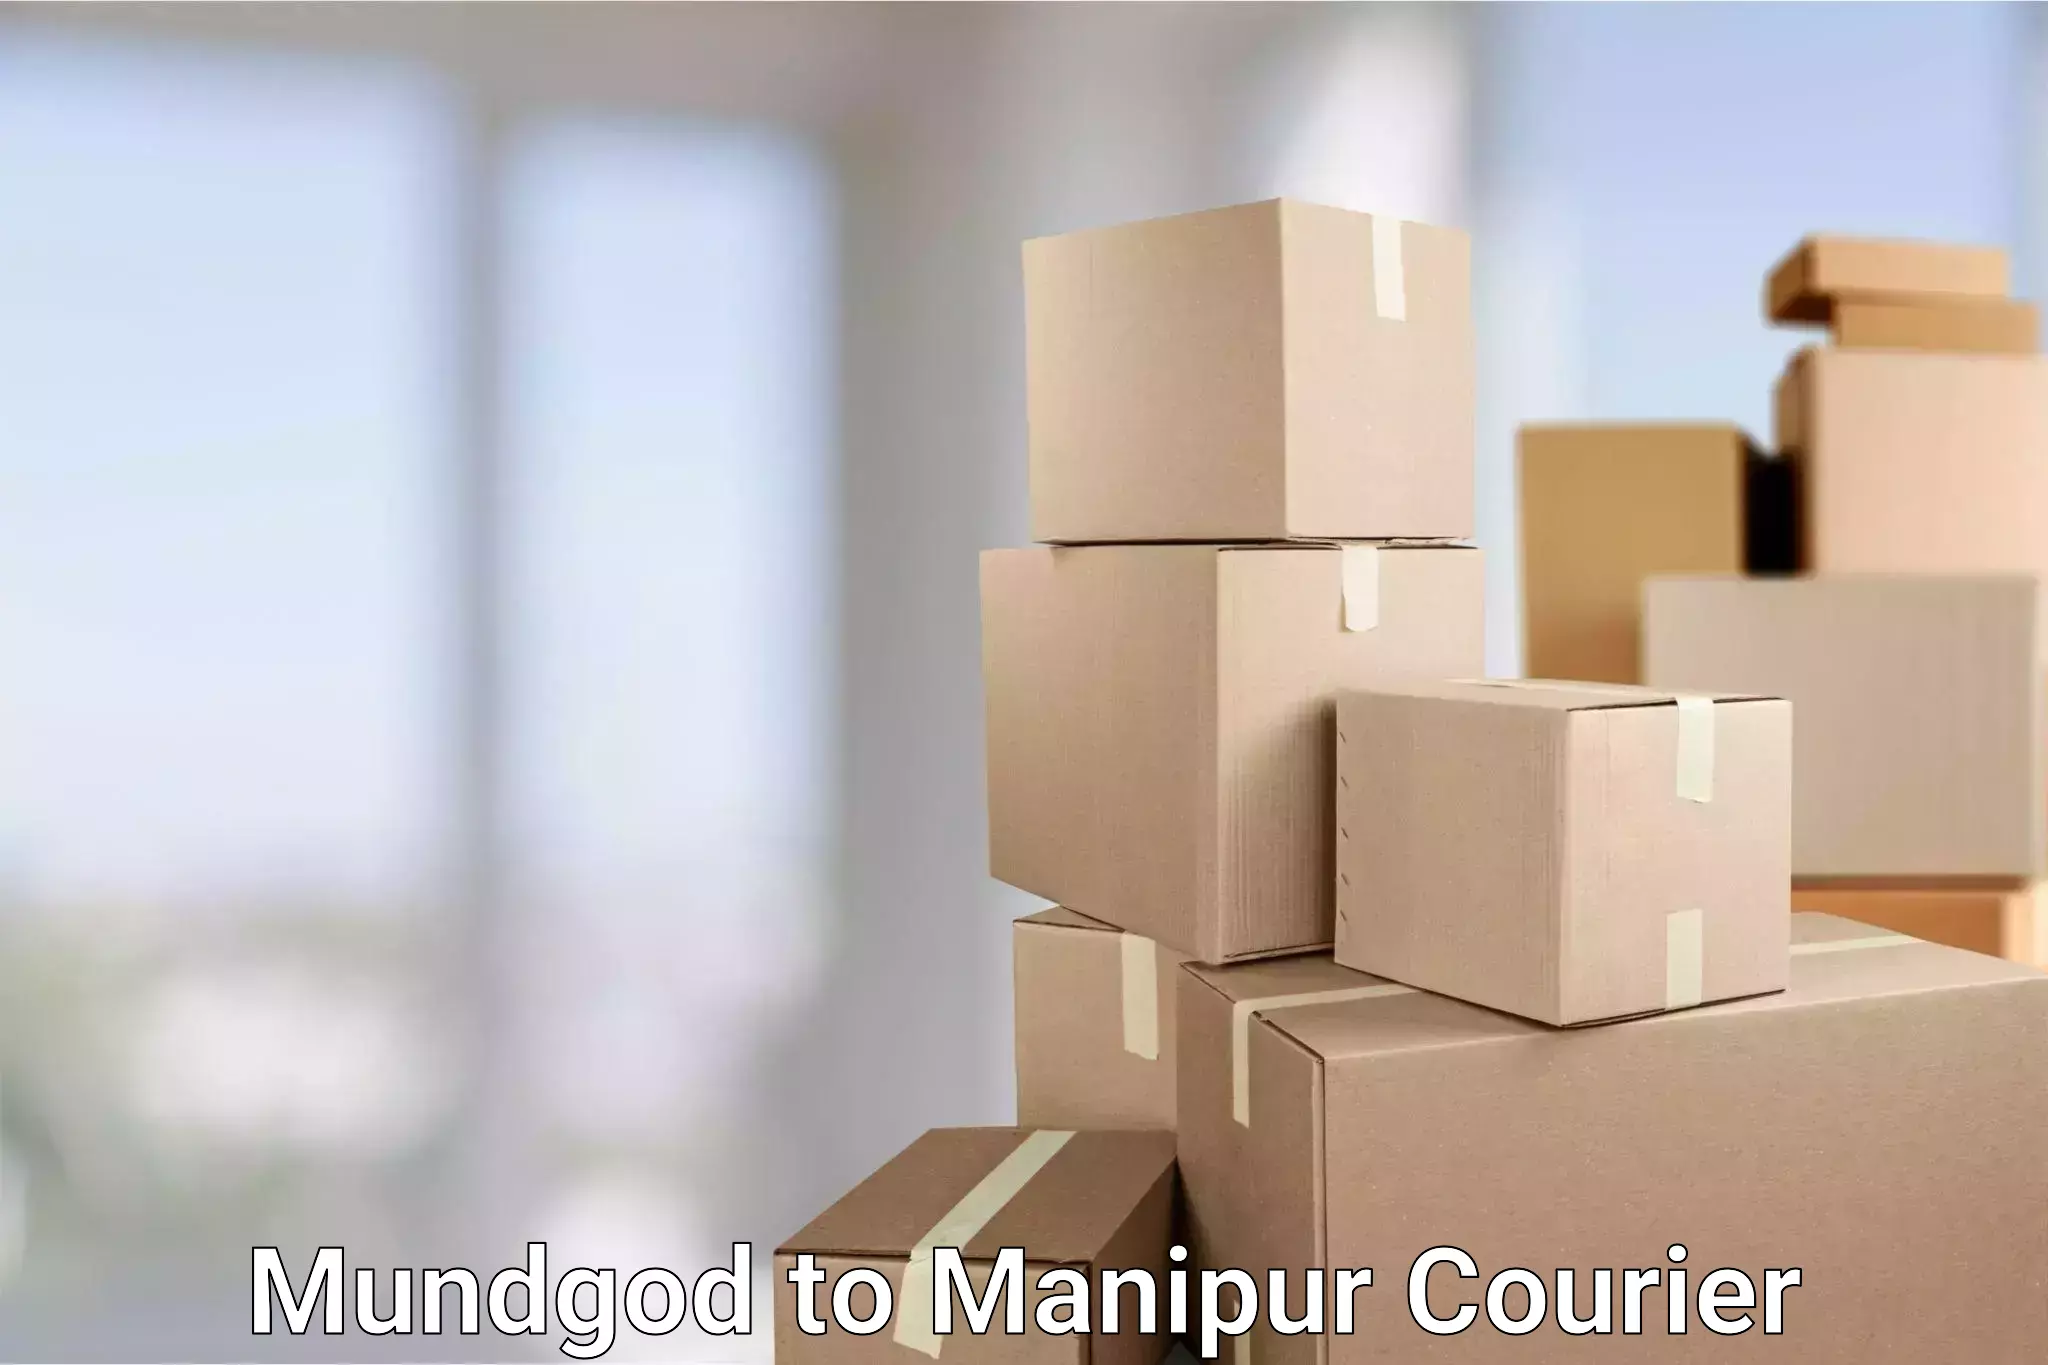 24-hour courier service in Mundgod to Imphal